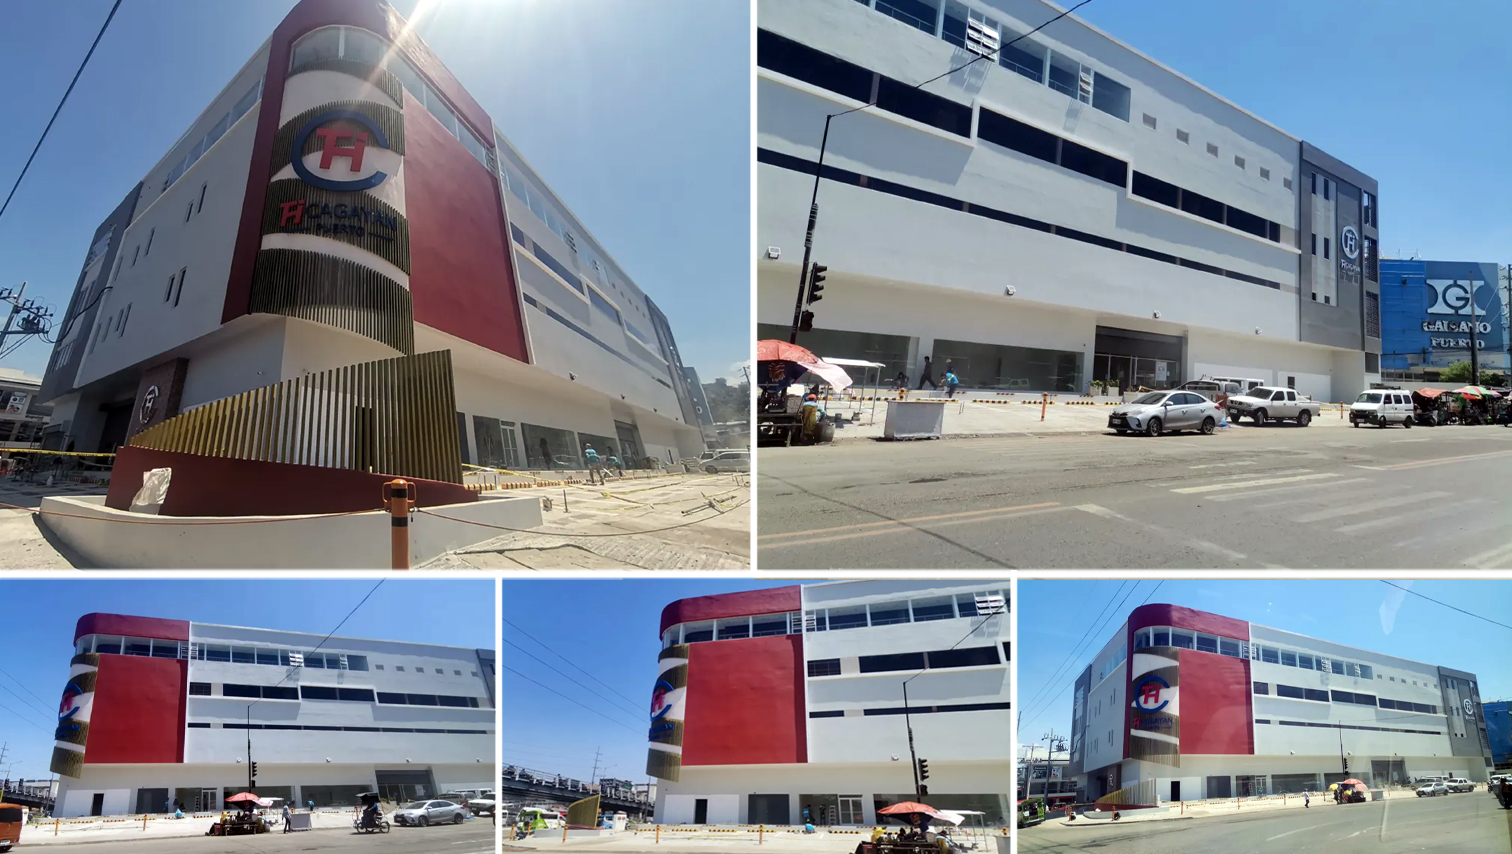 PROJECT WATCH: TH Cagayan Mall Puerto to open March 2